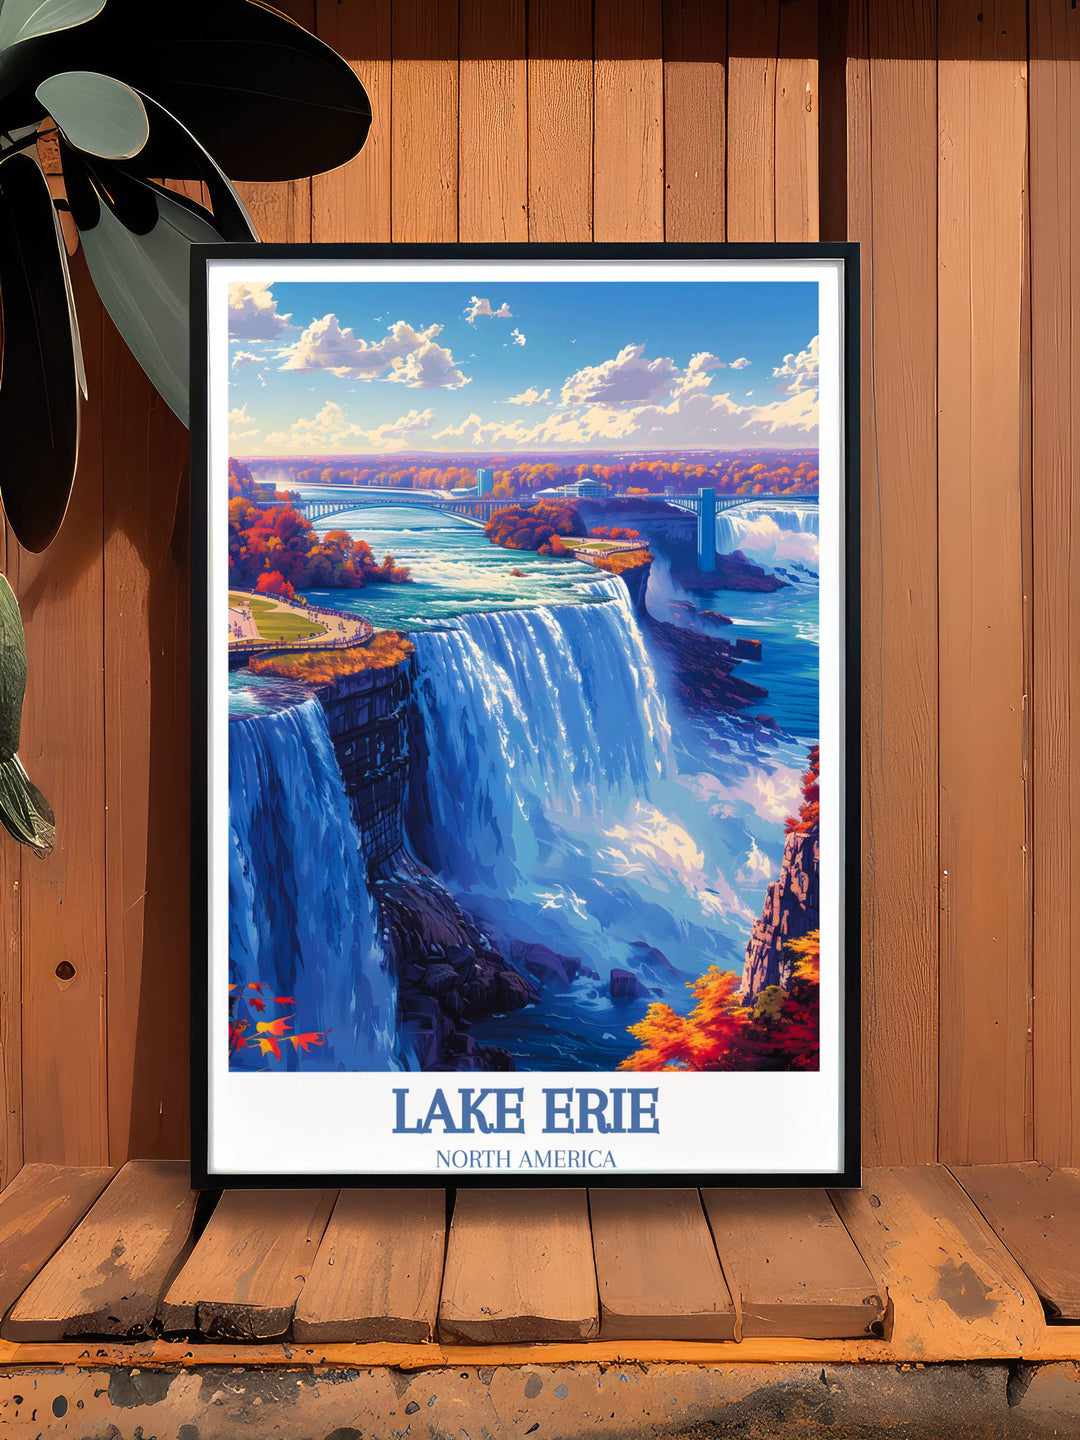 Customizable Lake Erie city map, an ideal personalized gift for urban explorers and map enthusiasts.